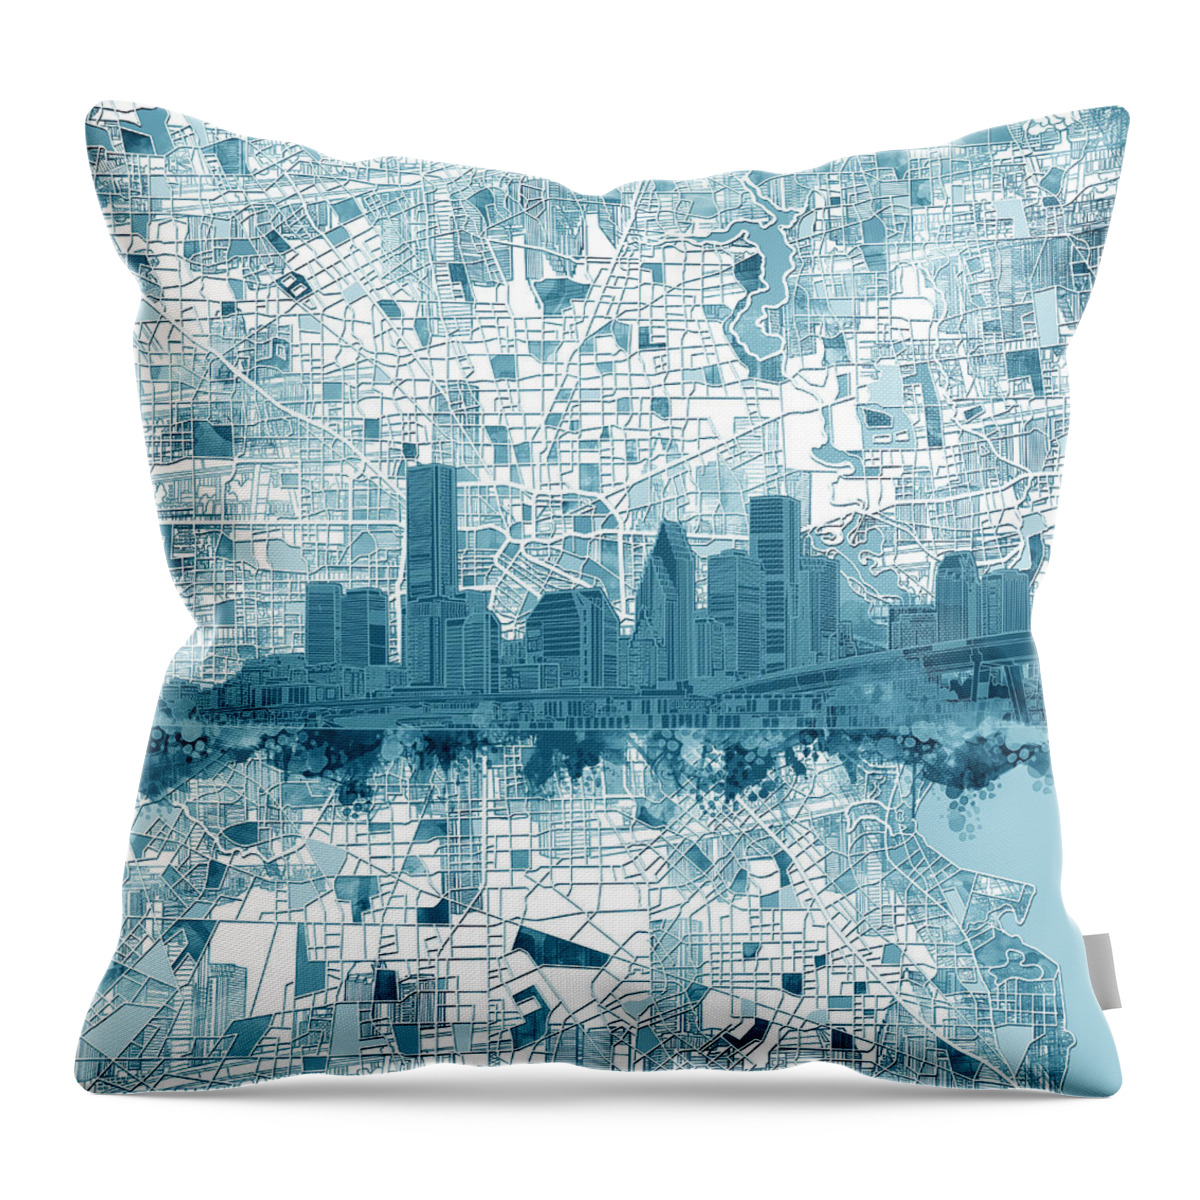 Houston Throw Pillow featuring the painting Houston Skyline Map 6 by Bekim M